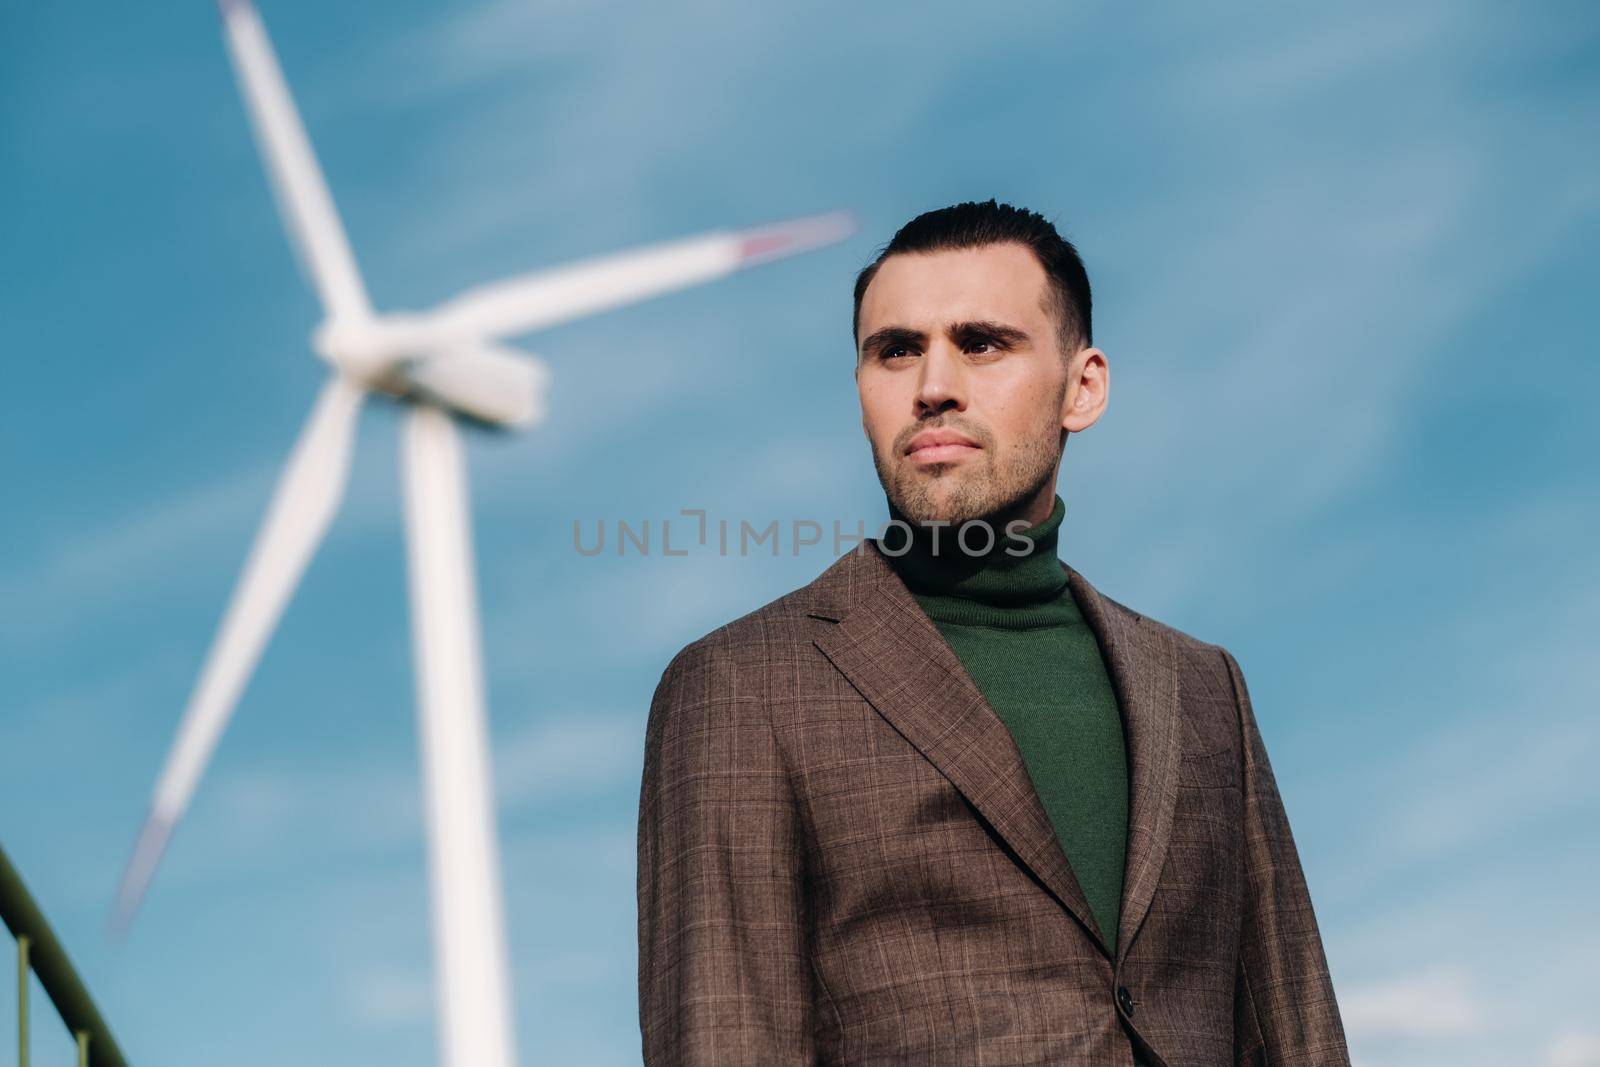 A man in a business suit with a green Golf shirt stands next to a windmill against the background of the field and the blue sky.Businessman near the windmills.Modern concept of the future